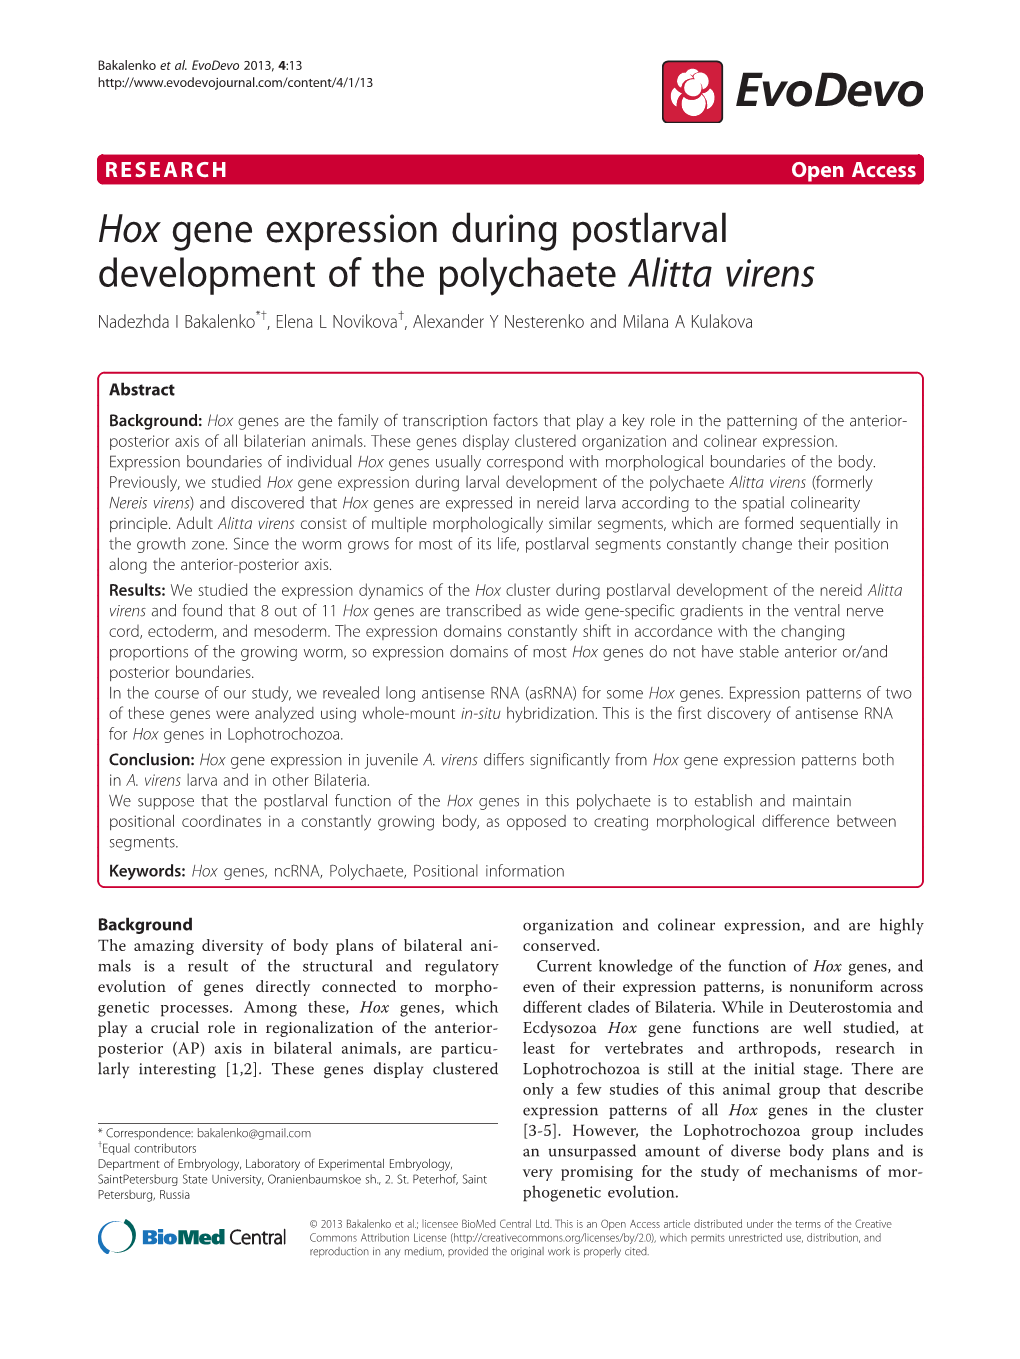 Hox Gene Expression During Postlarval Development of The